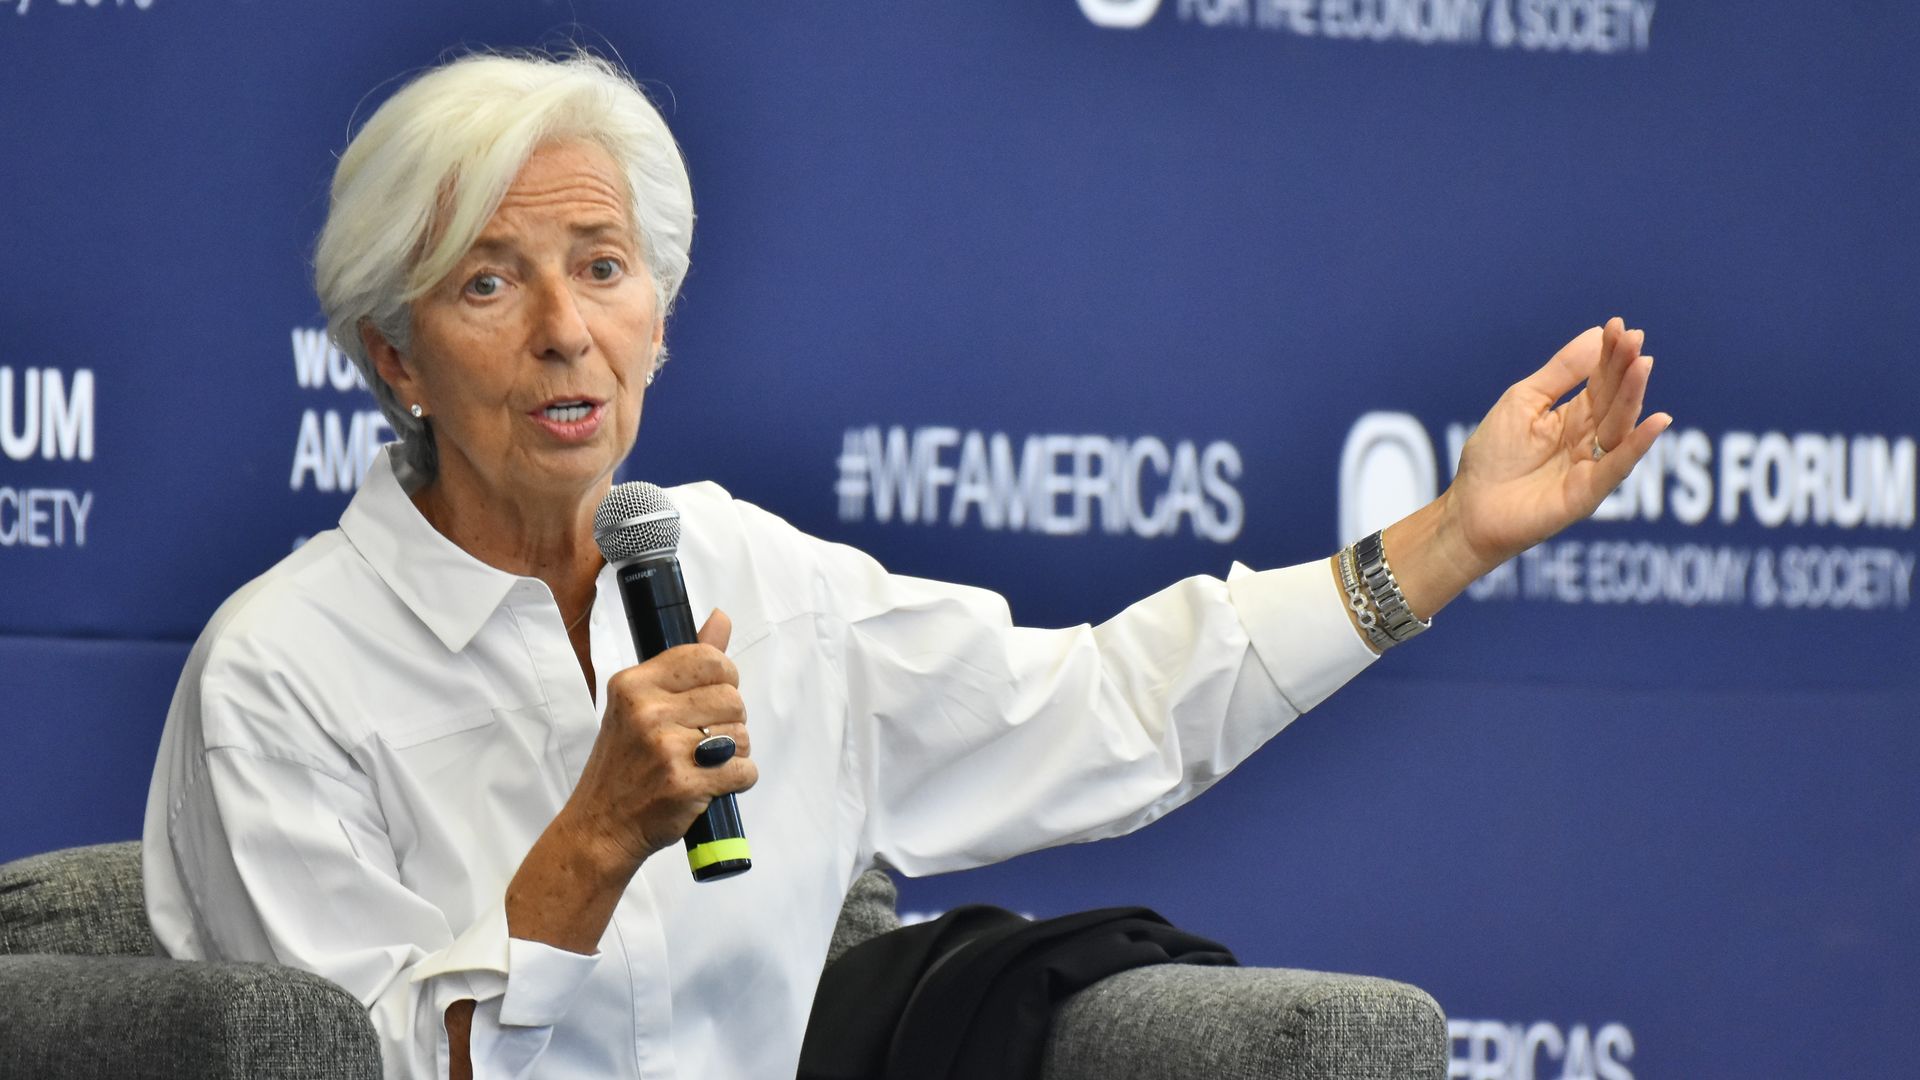 Christine Lagarde speaks at Women's Forum Americas 2019 at Claustro of Sor Juana University on May 30, 2019 in Mexico City, Mexico